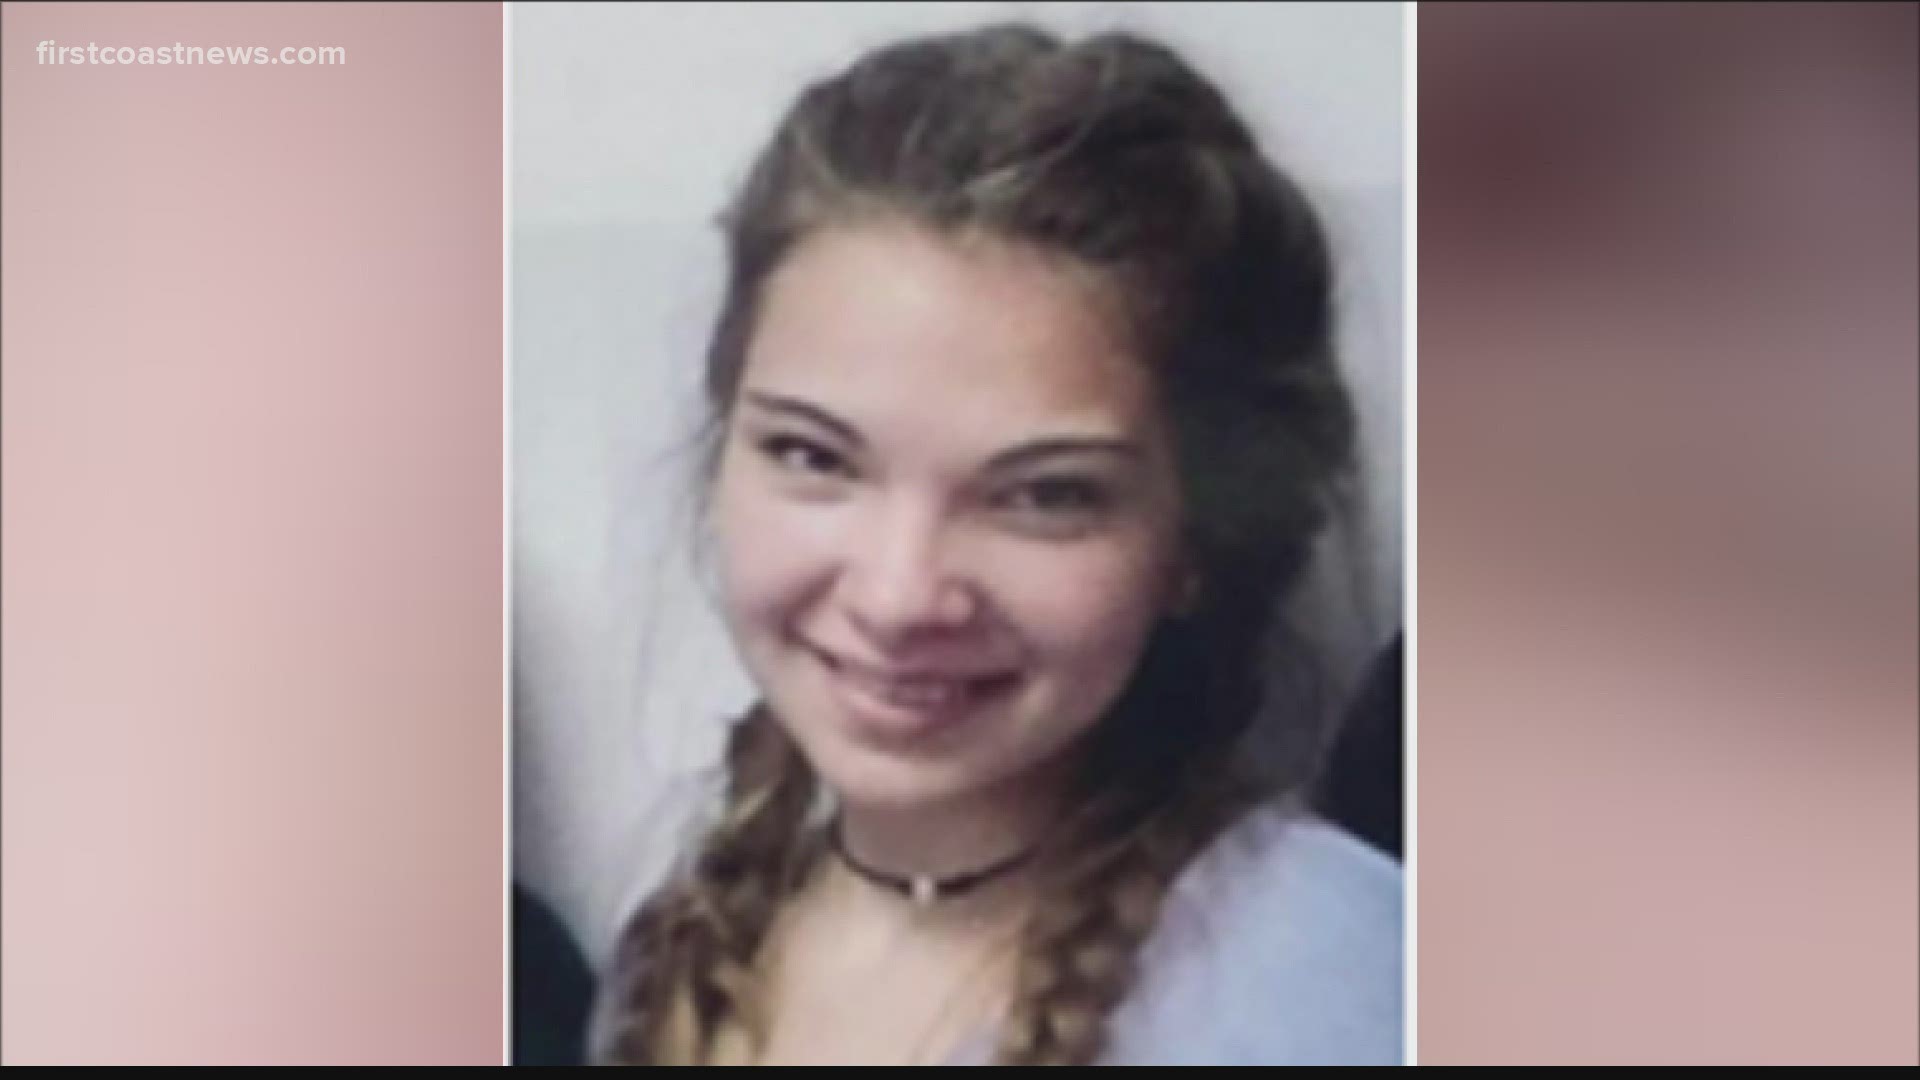 Search Underway For Missing Lake City Teenage Girl